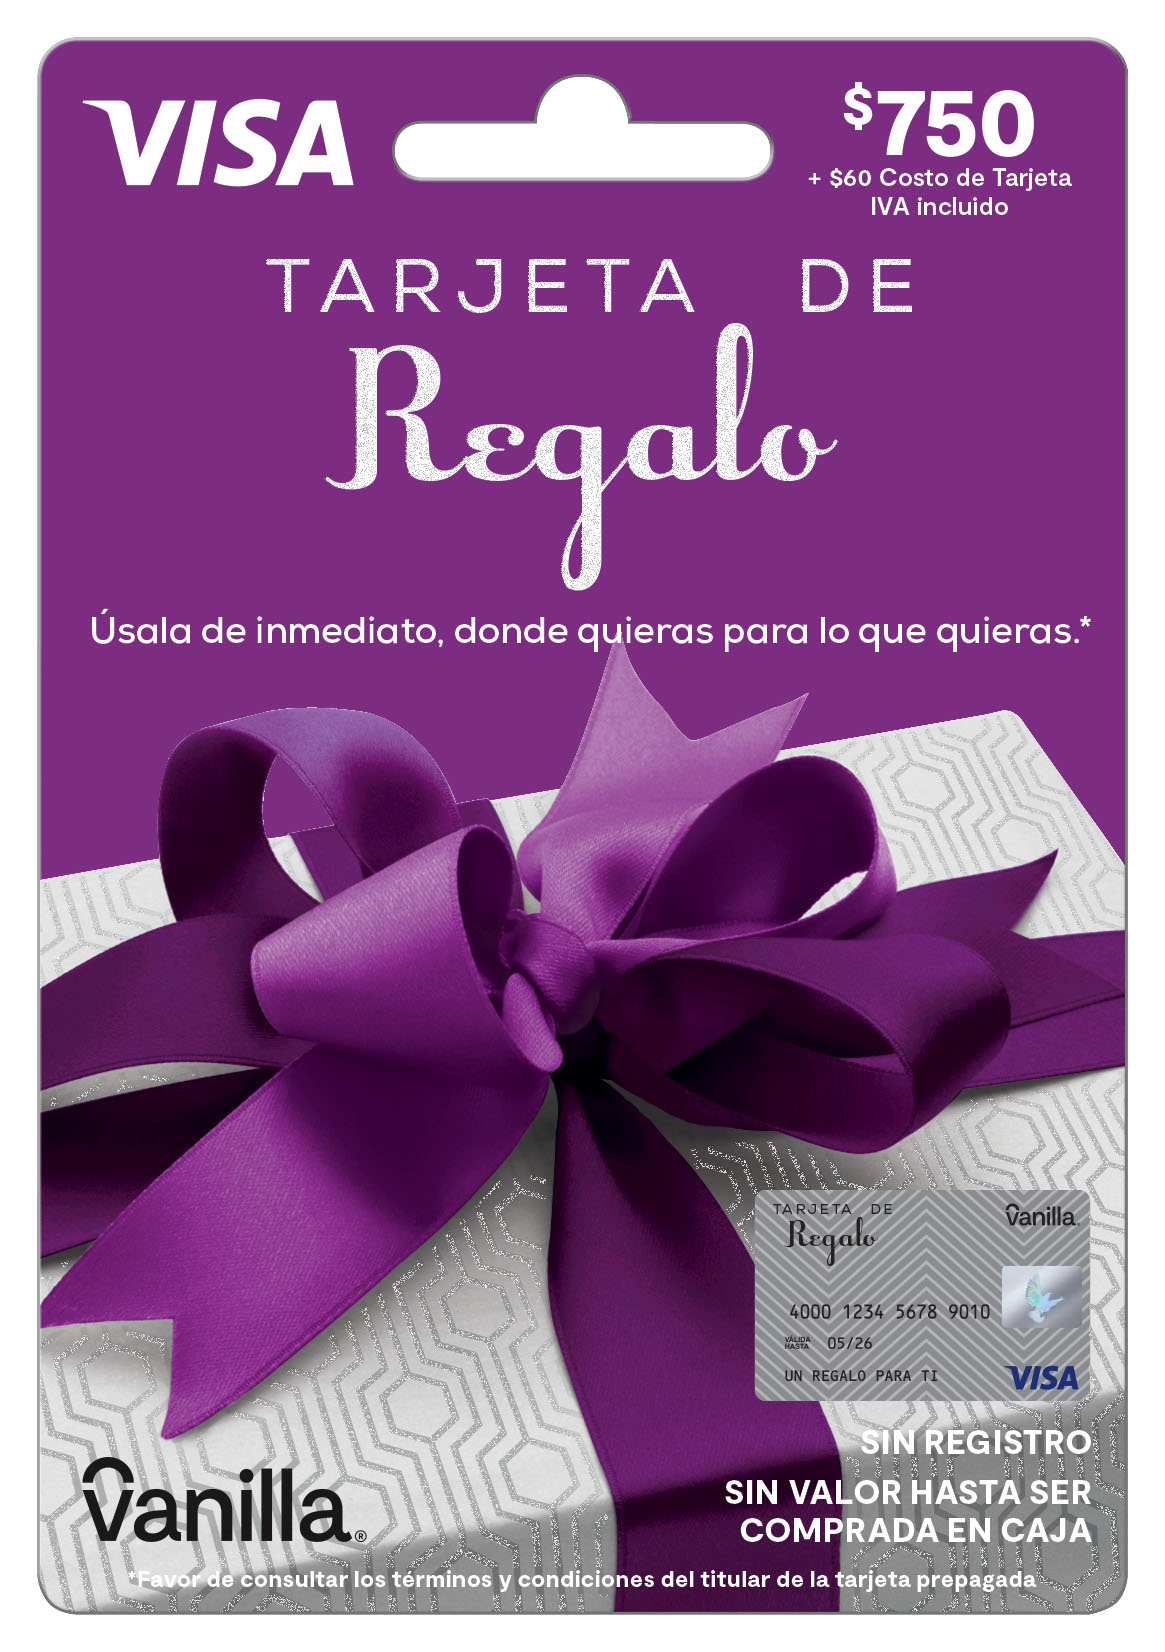 The ideal gift for everyone debuts in Mexico: Vanilla® Visa, Global Prepaid and Gift Card Brand ...